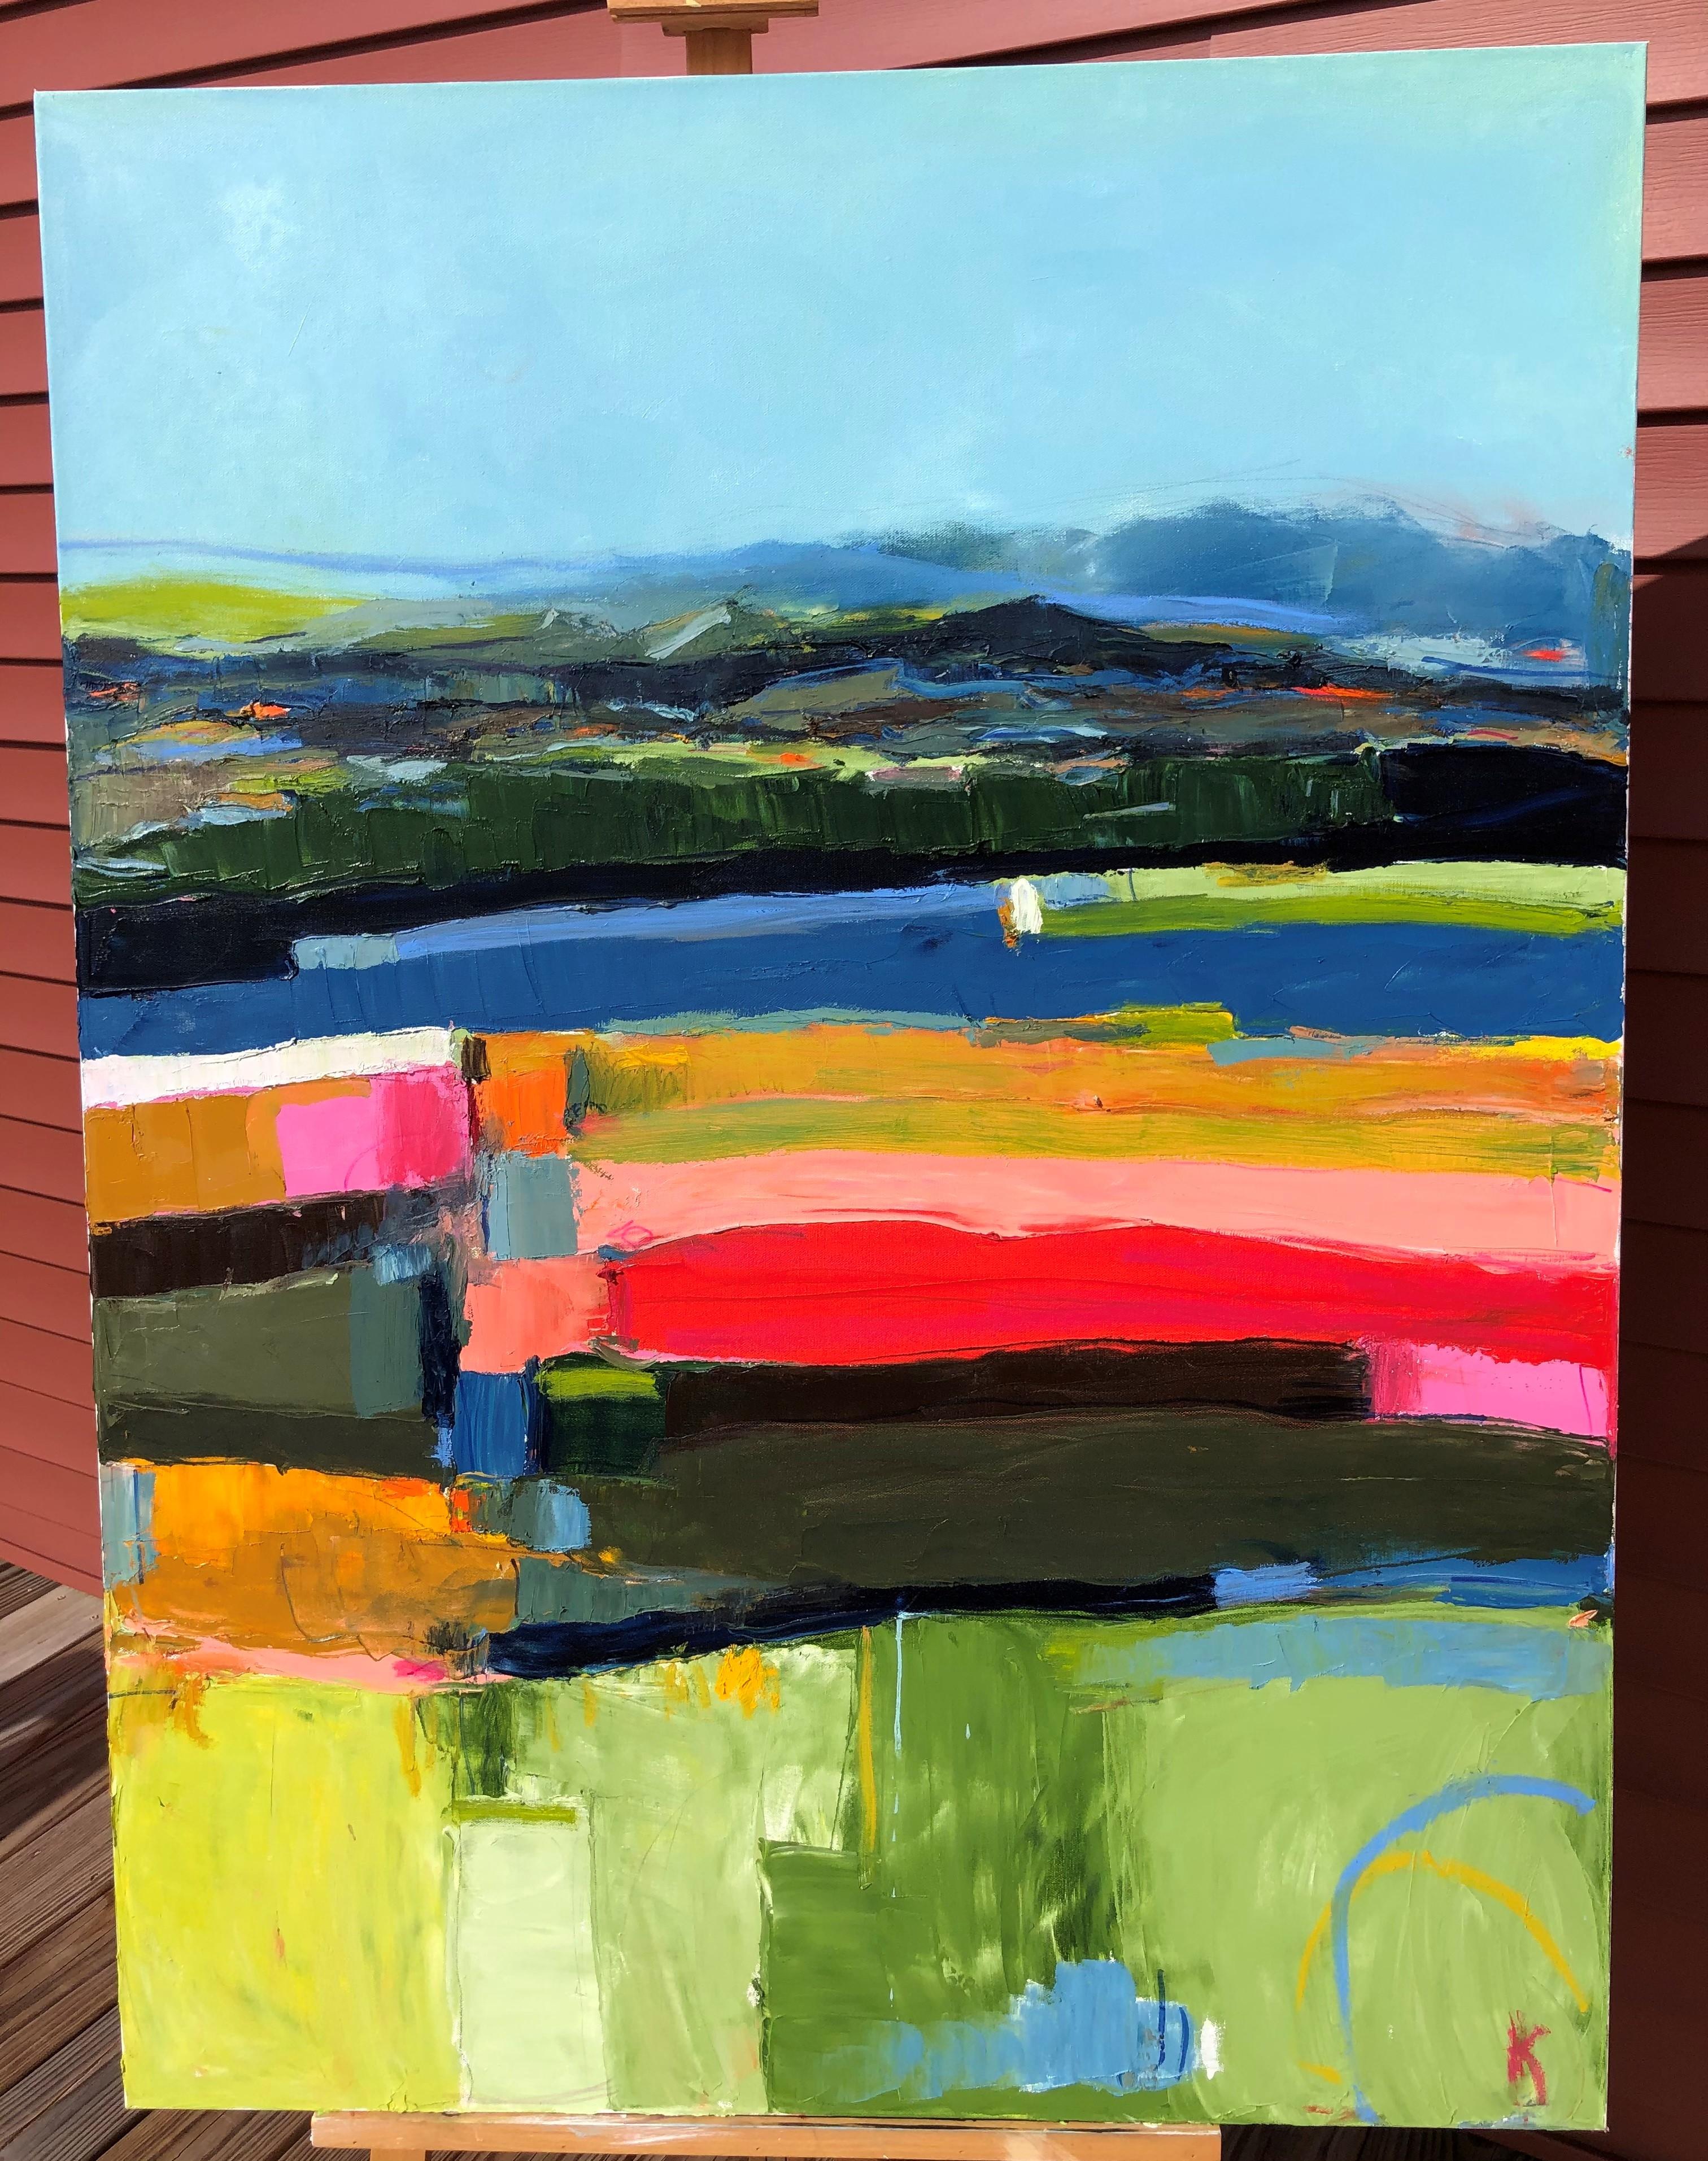 <p>Artist Comments<br />Inspired by its history, artist Rebecca Klementovich based expressionist landscape on a time when Abenaki Indians lived in Monhegan, Maine, which they called Out-to-Sea Island. 